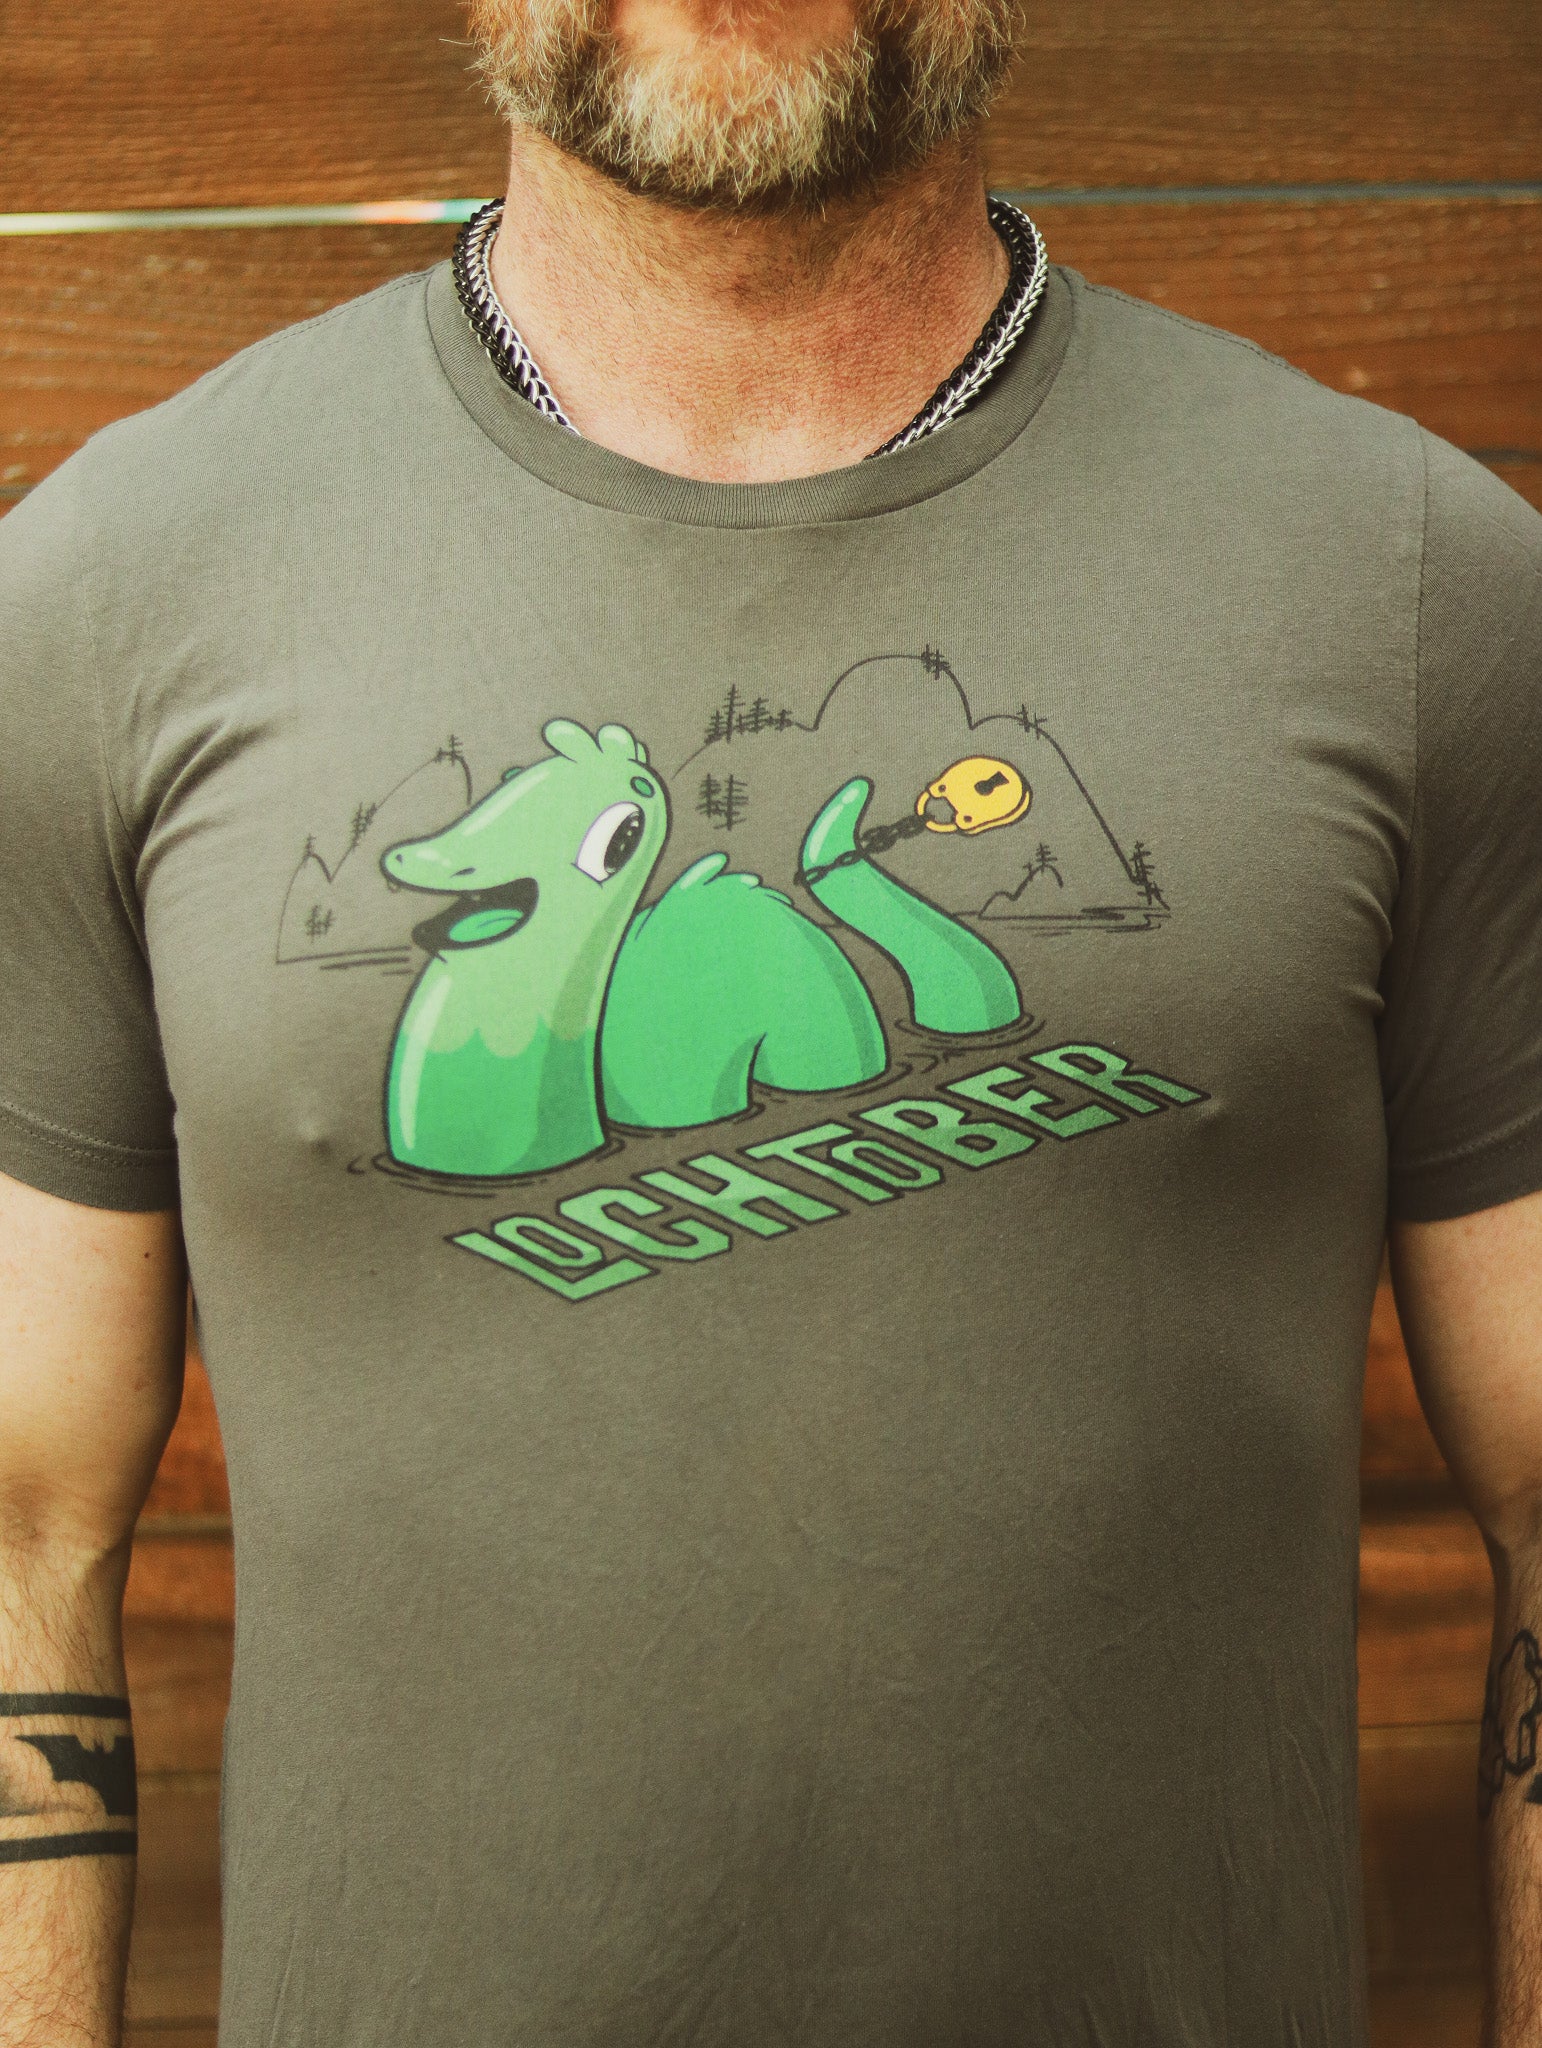 Grey Lochtober shirt featuring lochness monster with lock around tail, worn by bearded man standing in front of wooden wall..